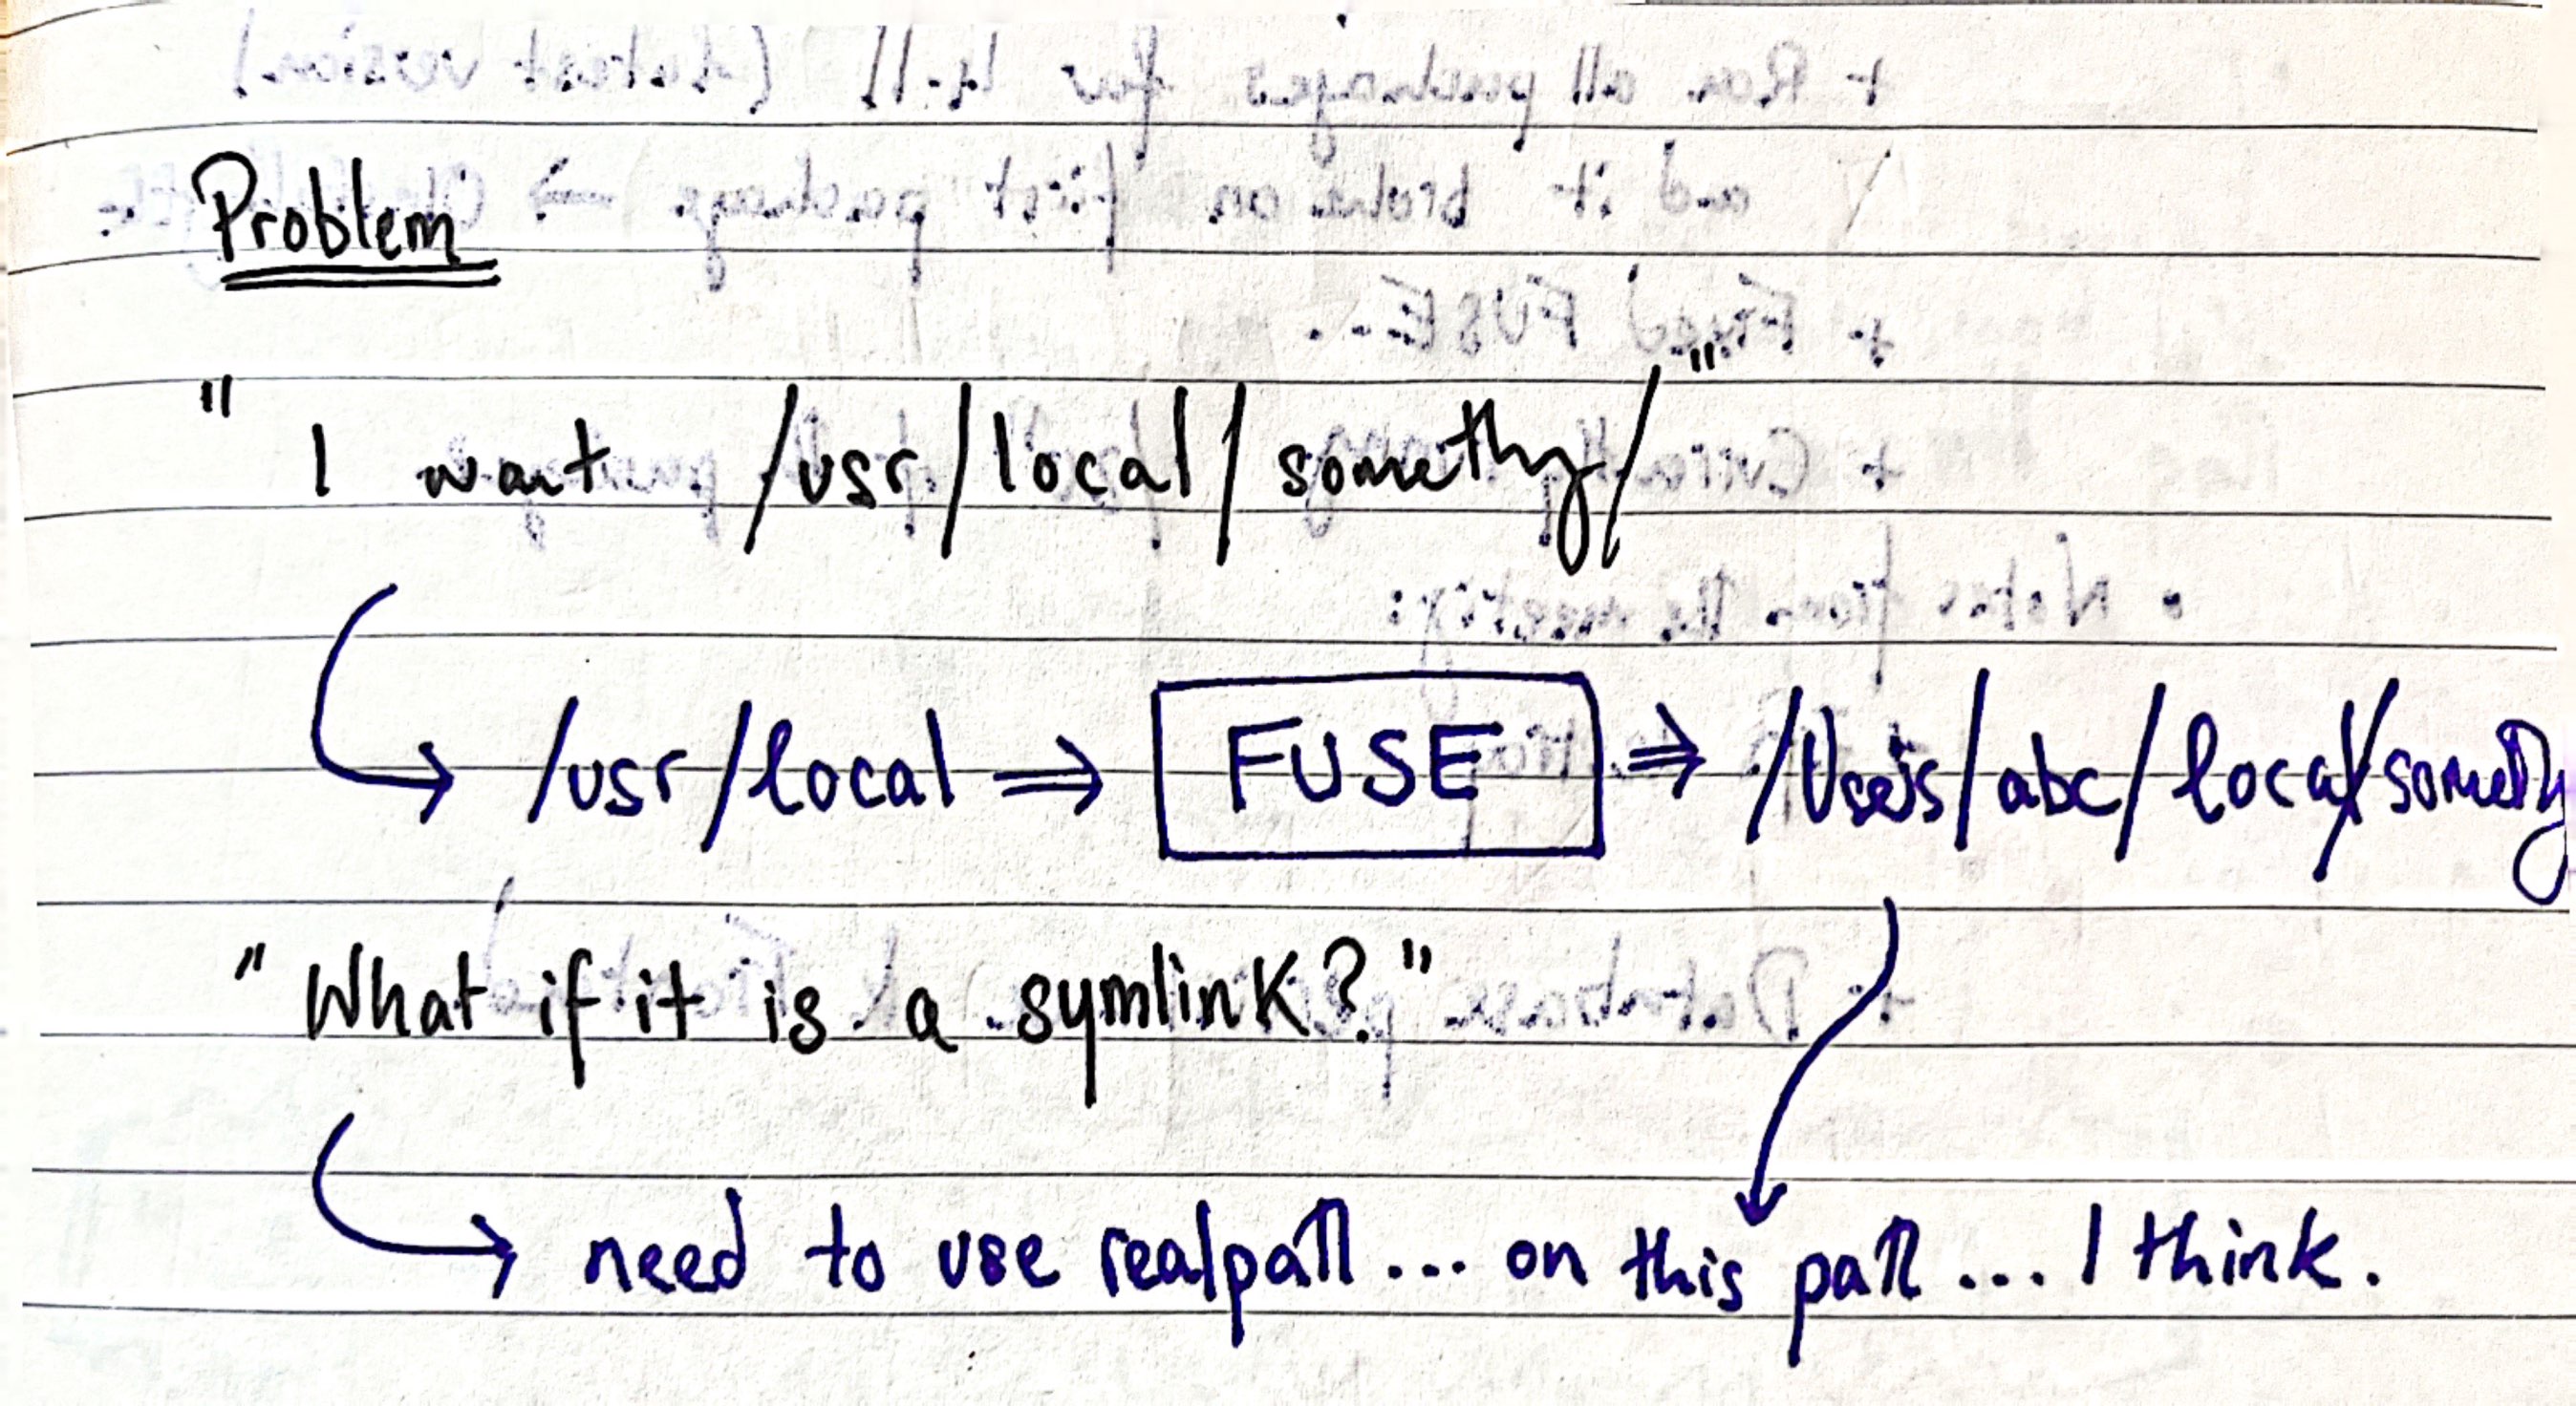 A messy note descibing how FUSE can intercept call to /usr/local and redirect them to a user's specific home directory in order to get around homebrew being globally installed.